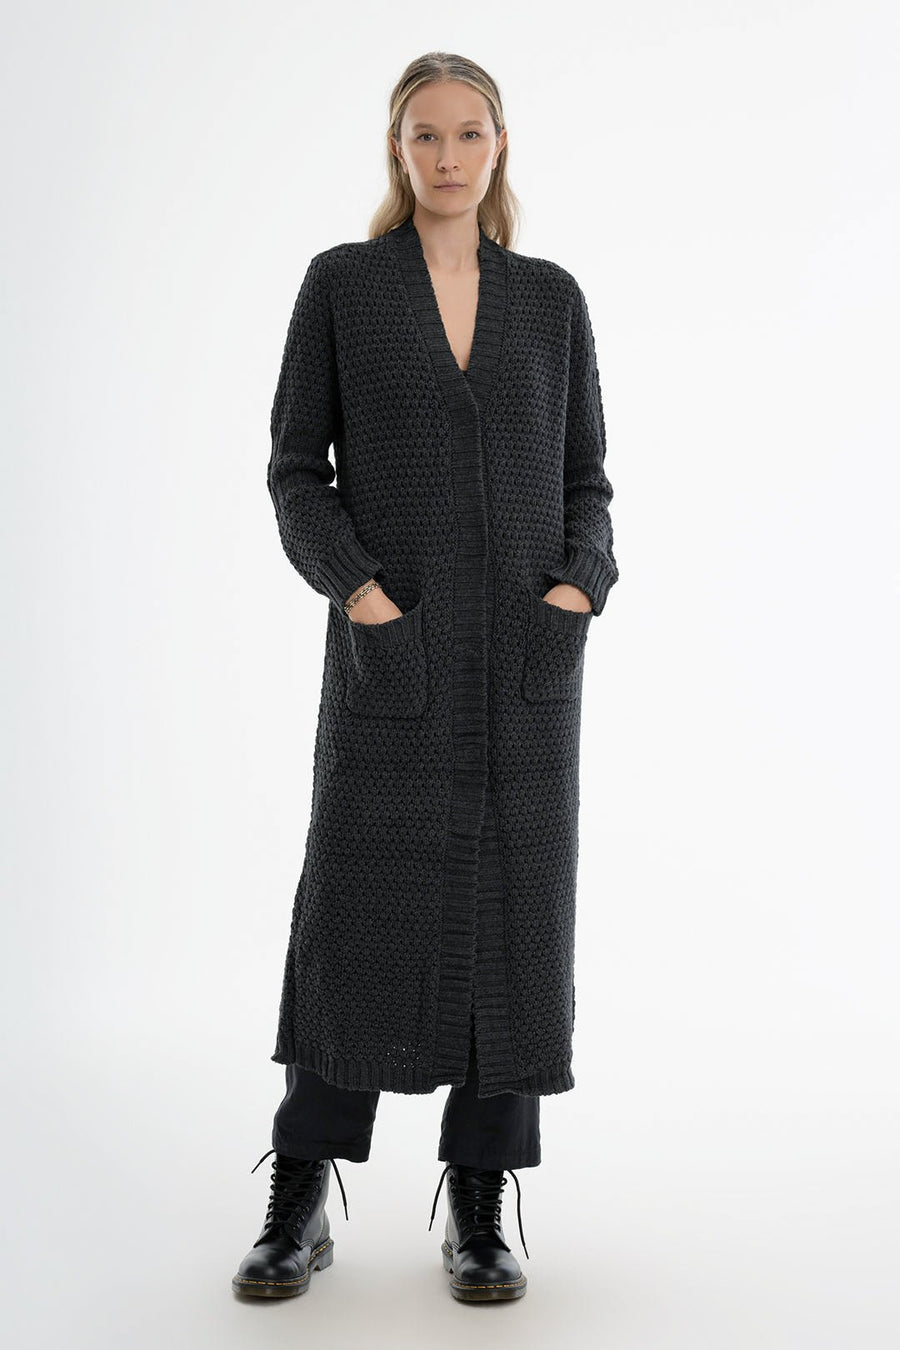 HONEYCOMB LONG CARDIGAN, CHARCOAL - Burning Torch Online Boutique